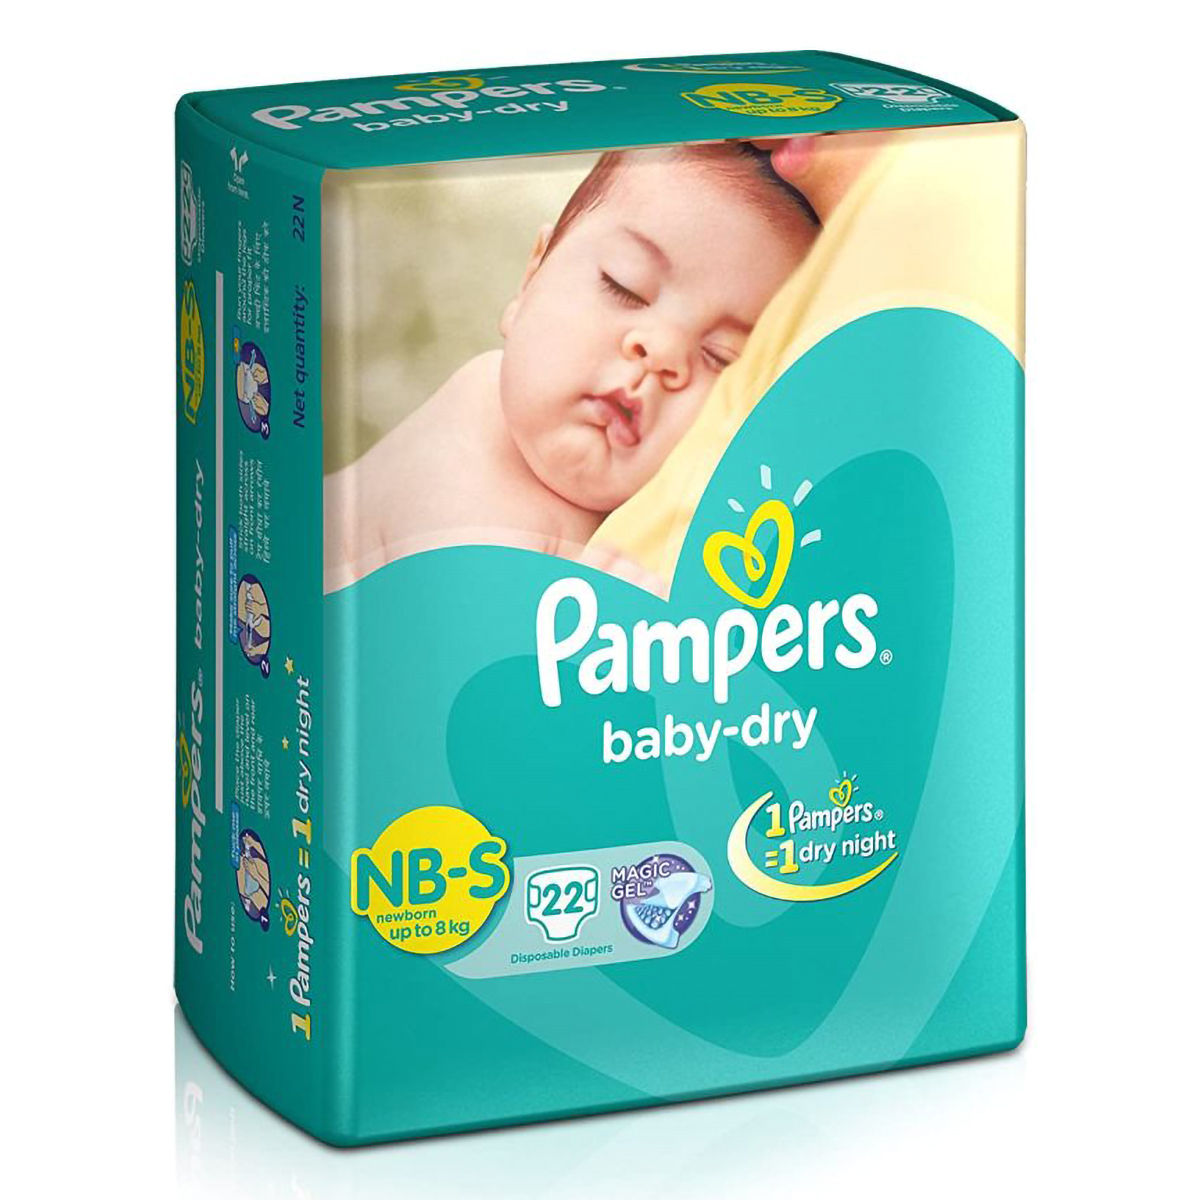 Pampers baby dry Pants XL Aloevera